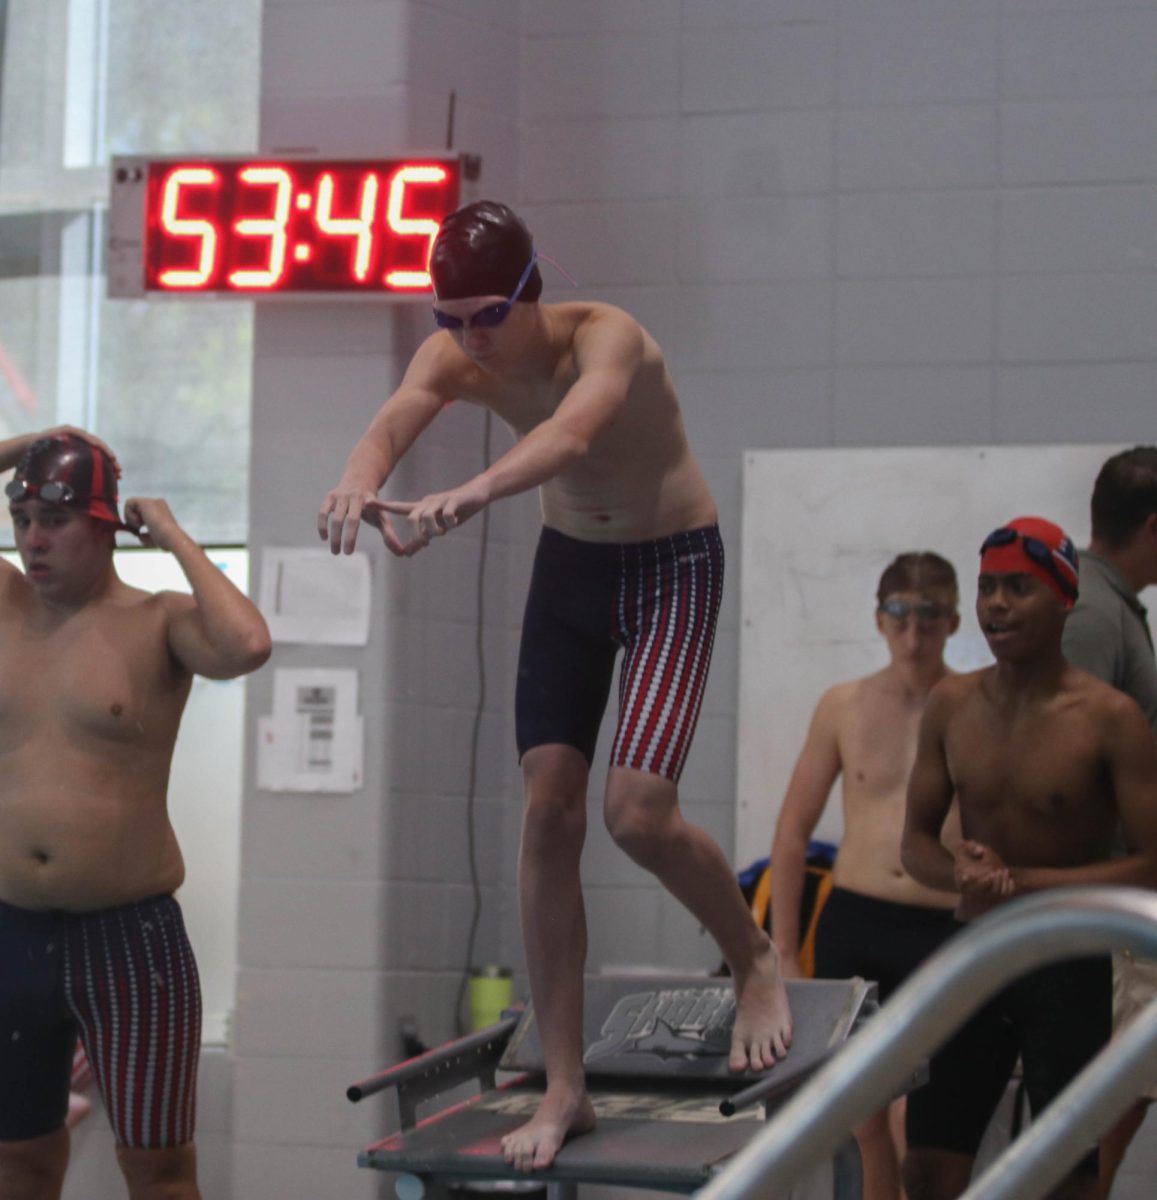 Benjamin Wibbenmeyer waits in start position for freestyle relay race after Jimenez Turner at RecPlex relay meet on Oct. 5.